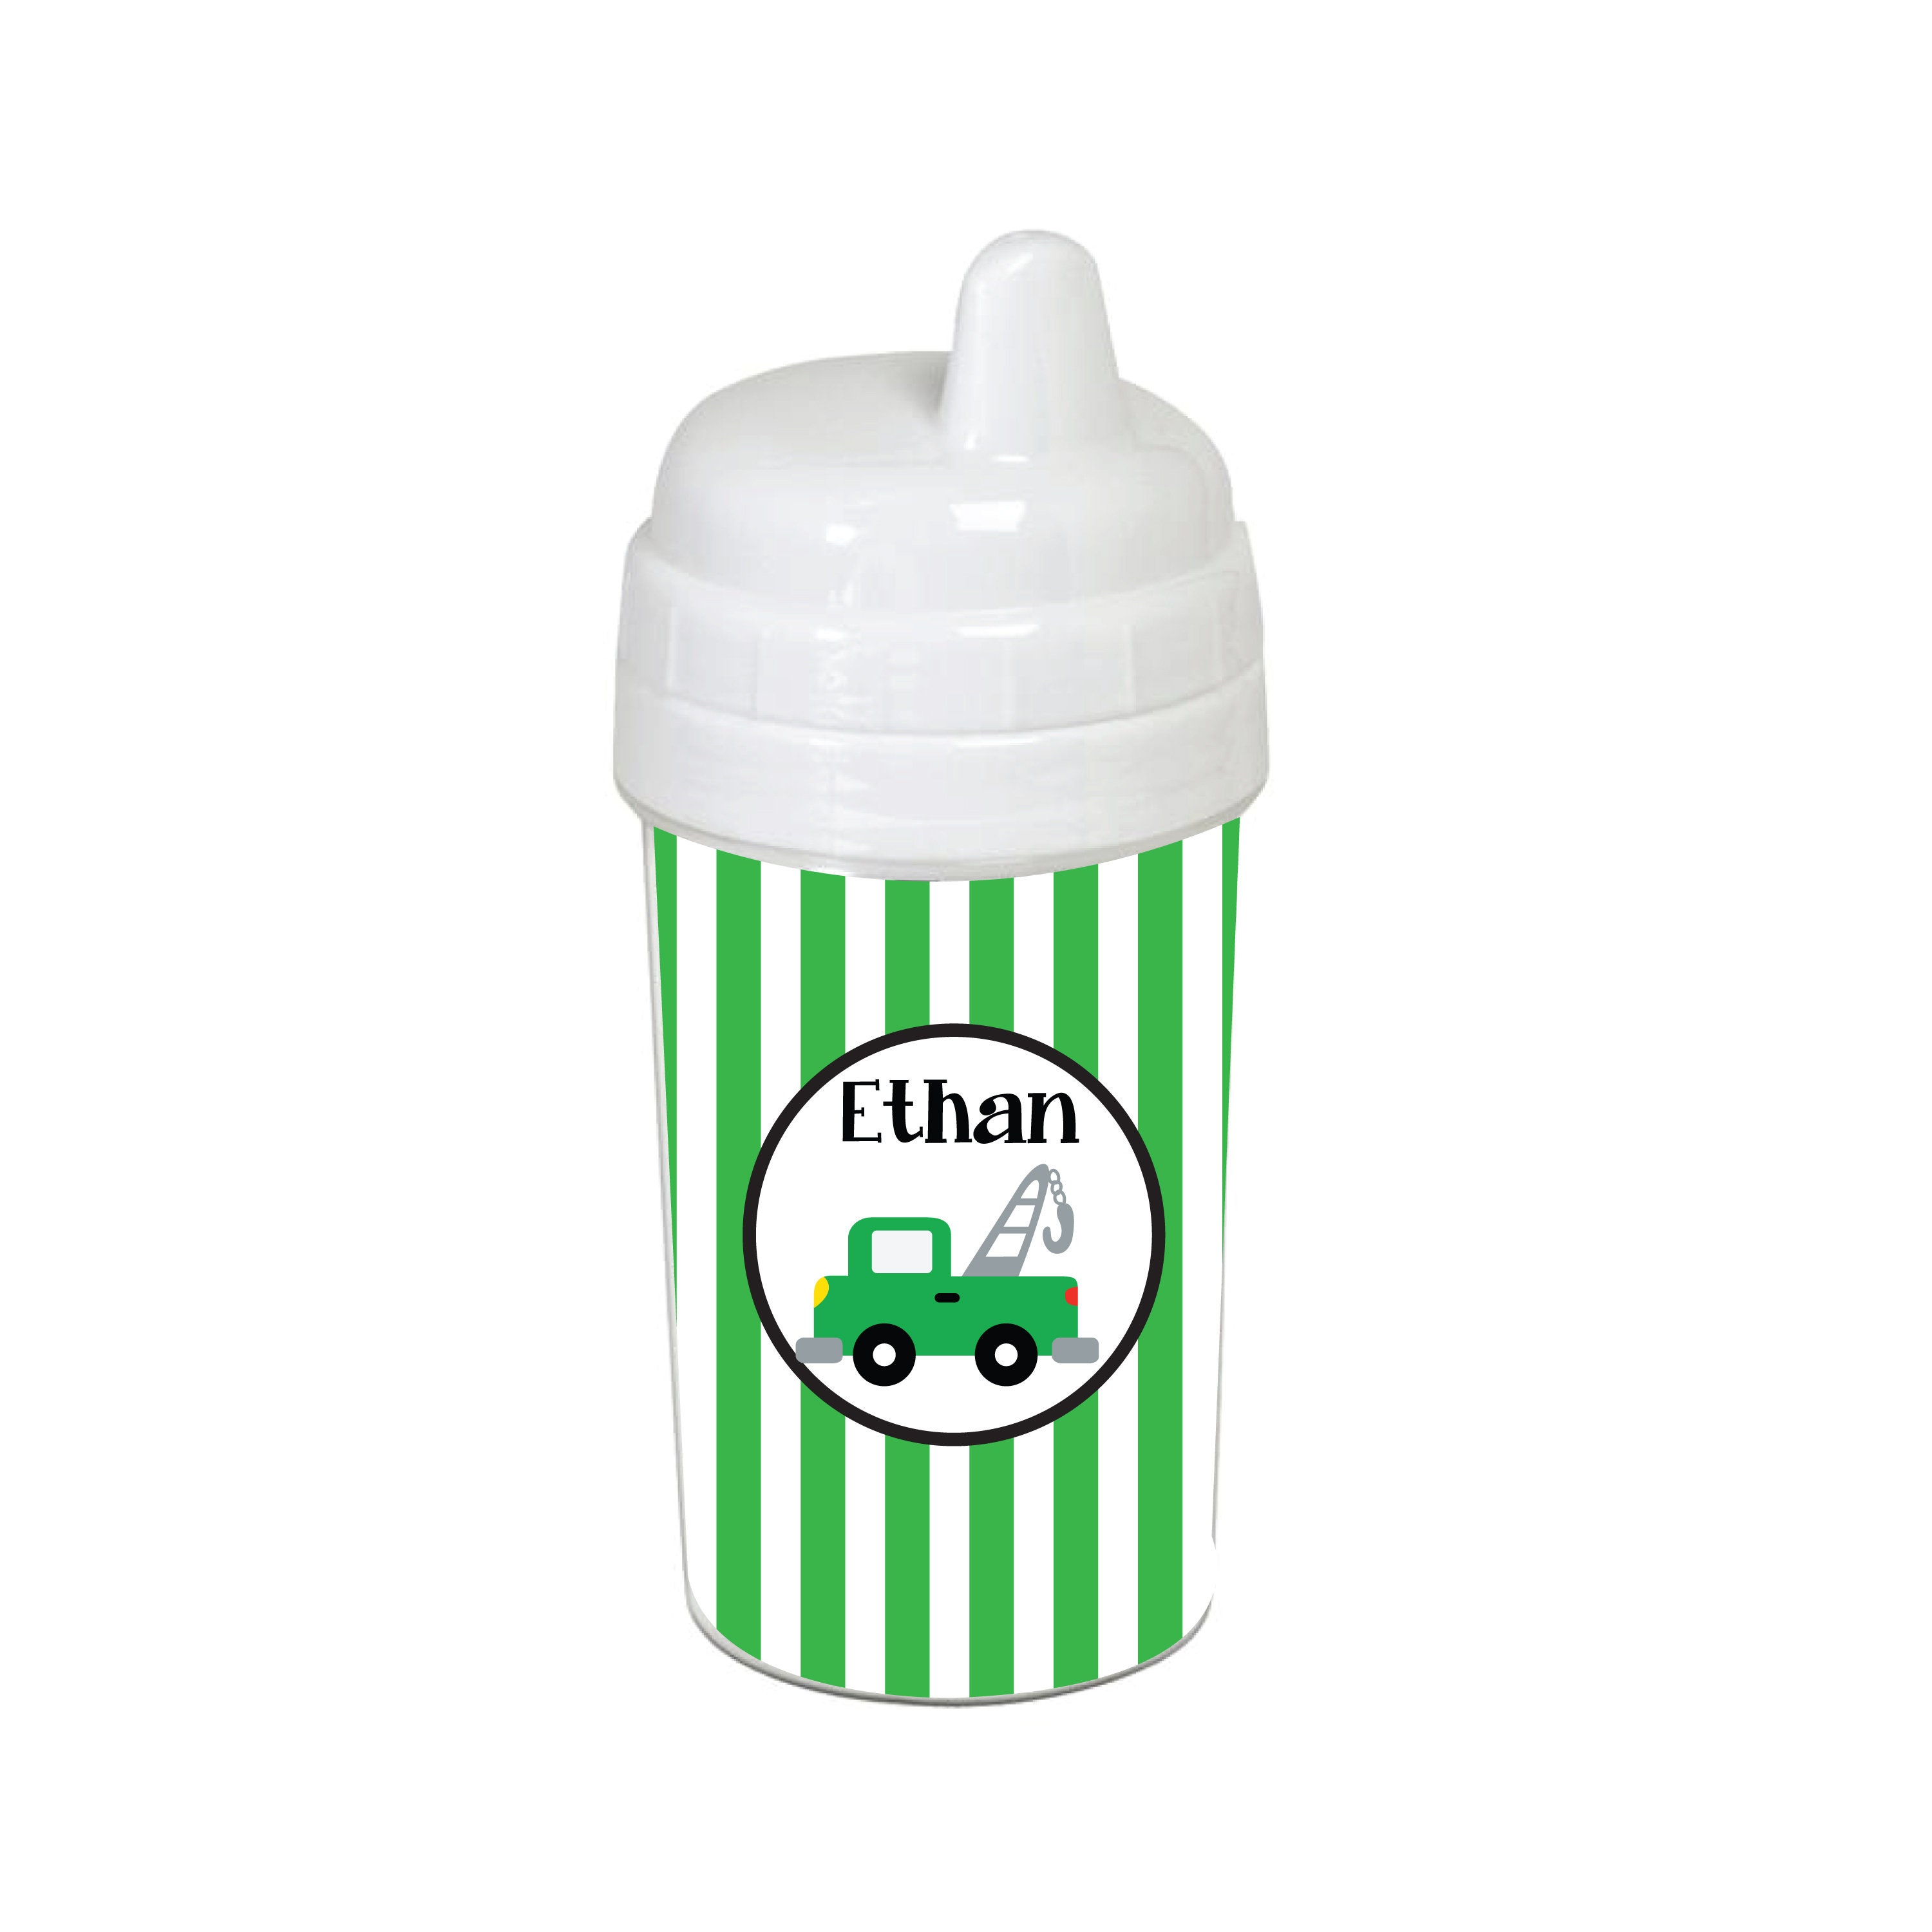 Waterproof Daycare Labels, Monogram Baby Bottle Labels, Dishwasher Safe  Labels, Personalized Stickers, Preppy Baby 